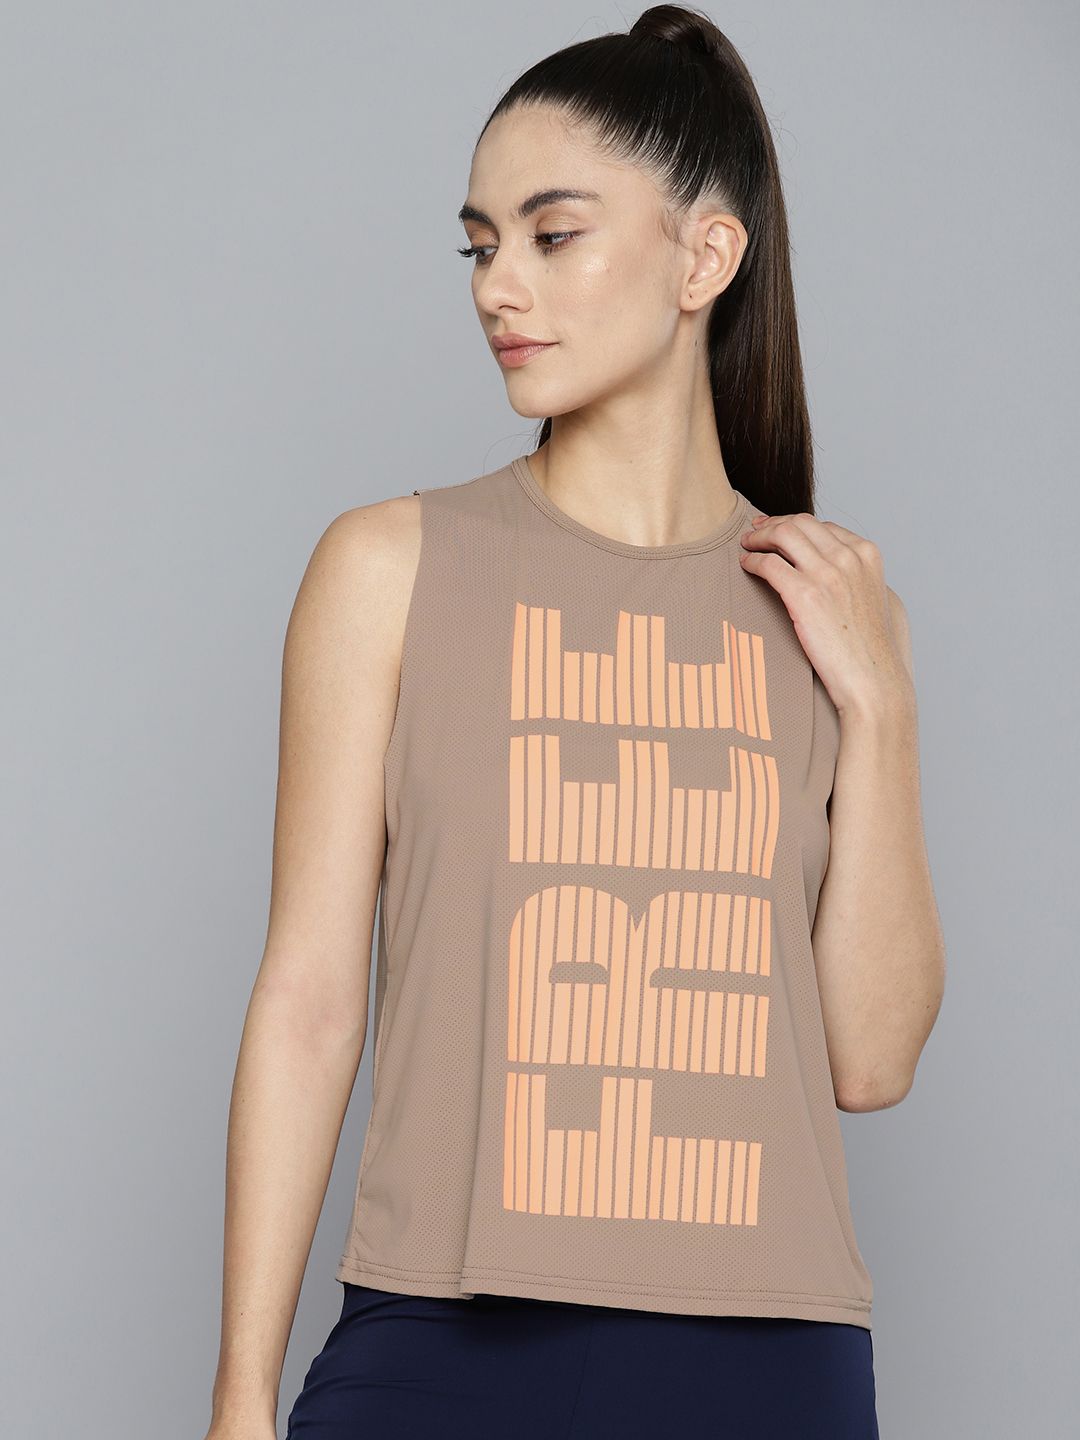 Fitkin Women Taupe Typography Printed Loose Sports T-shirt Price in India